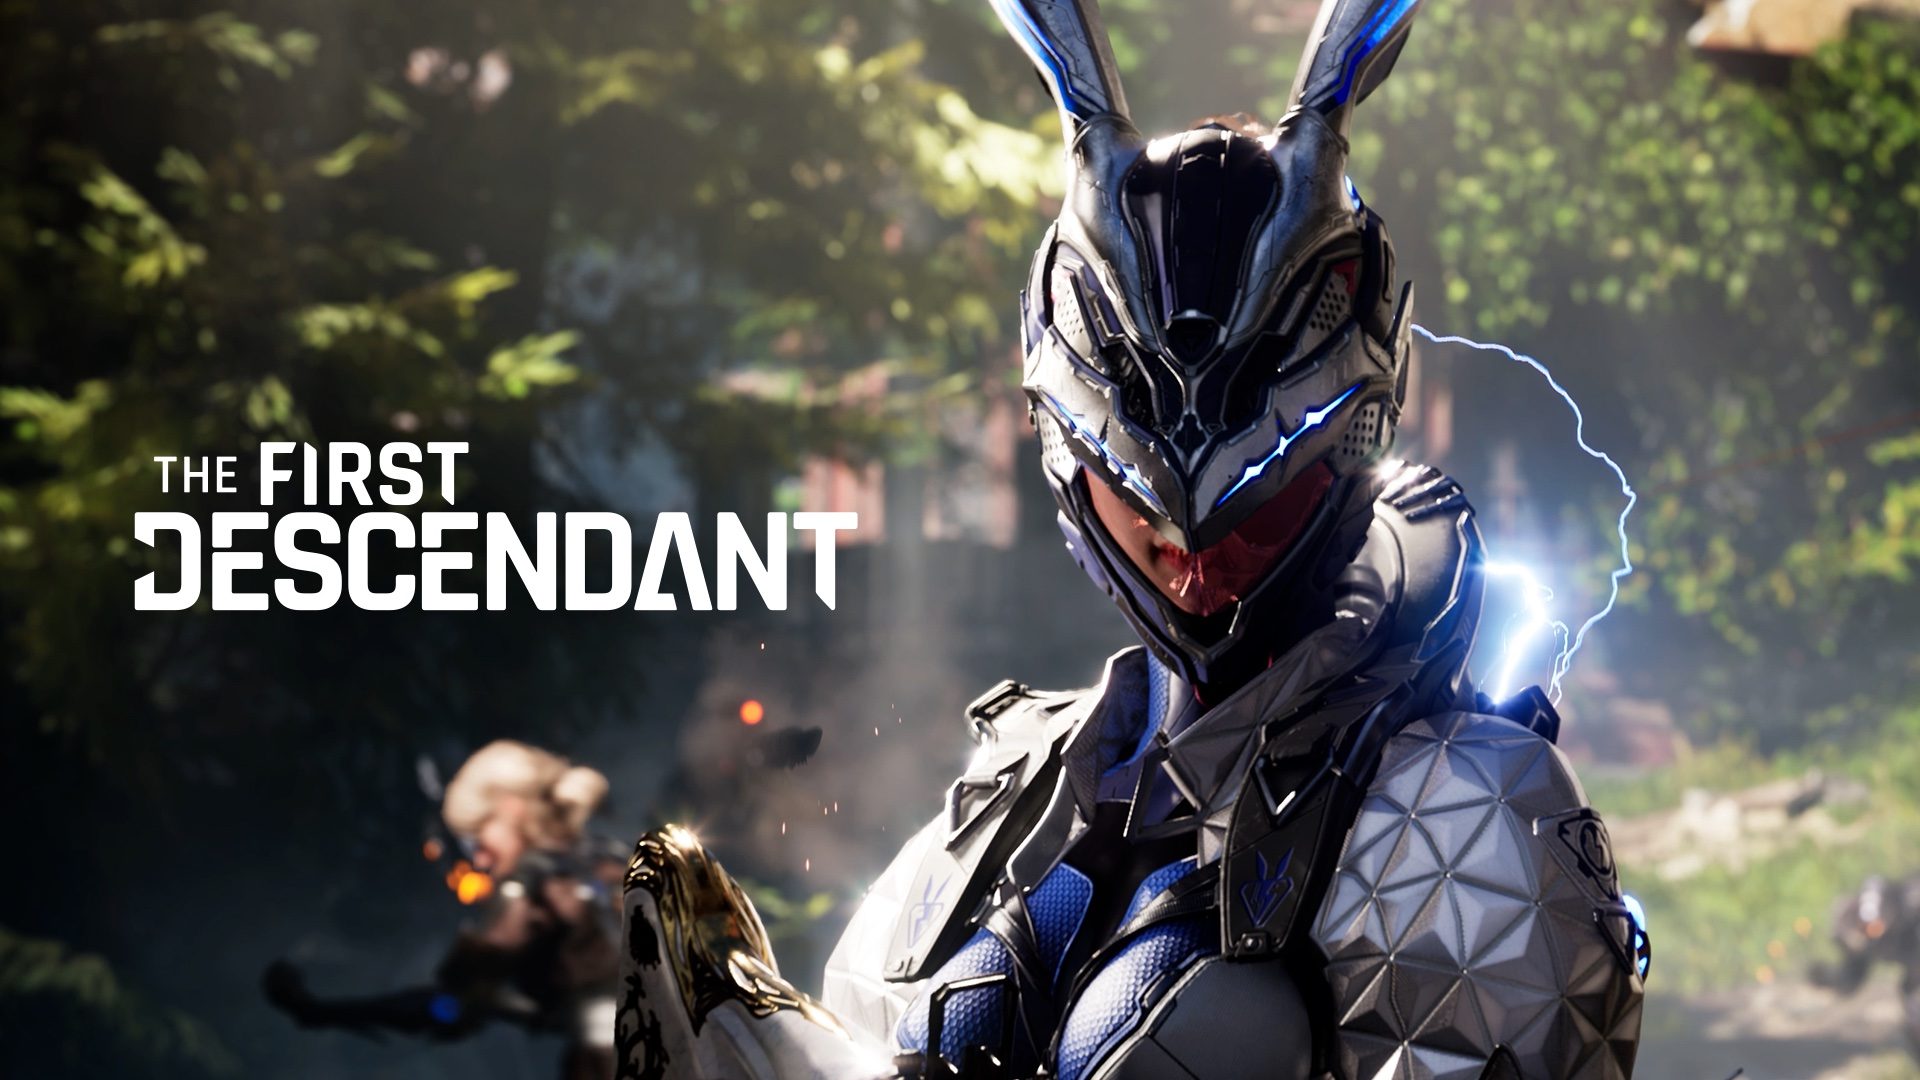 Experience The First Descendant open beta with immersive DualSense